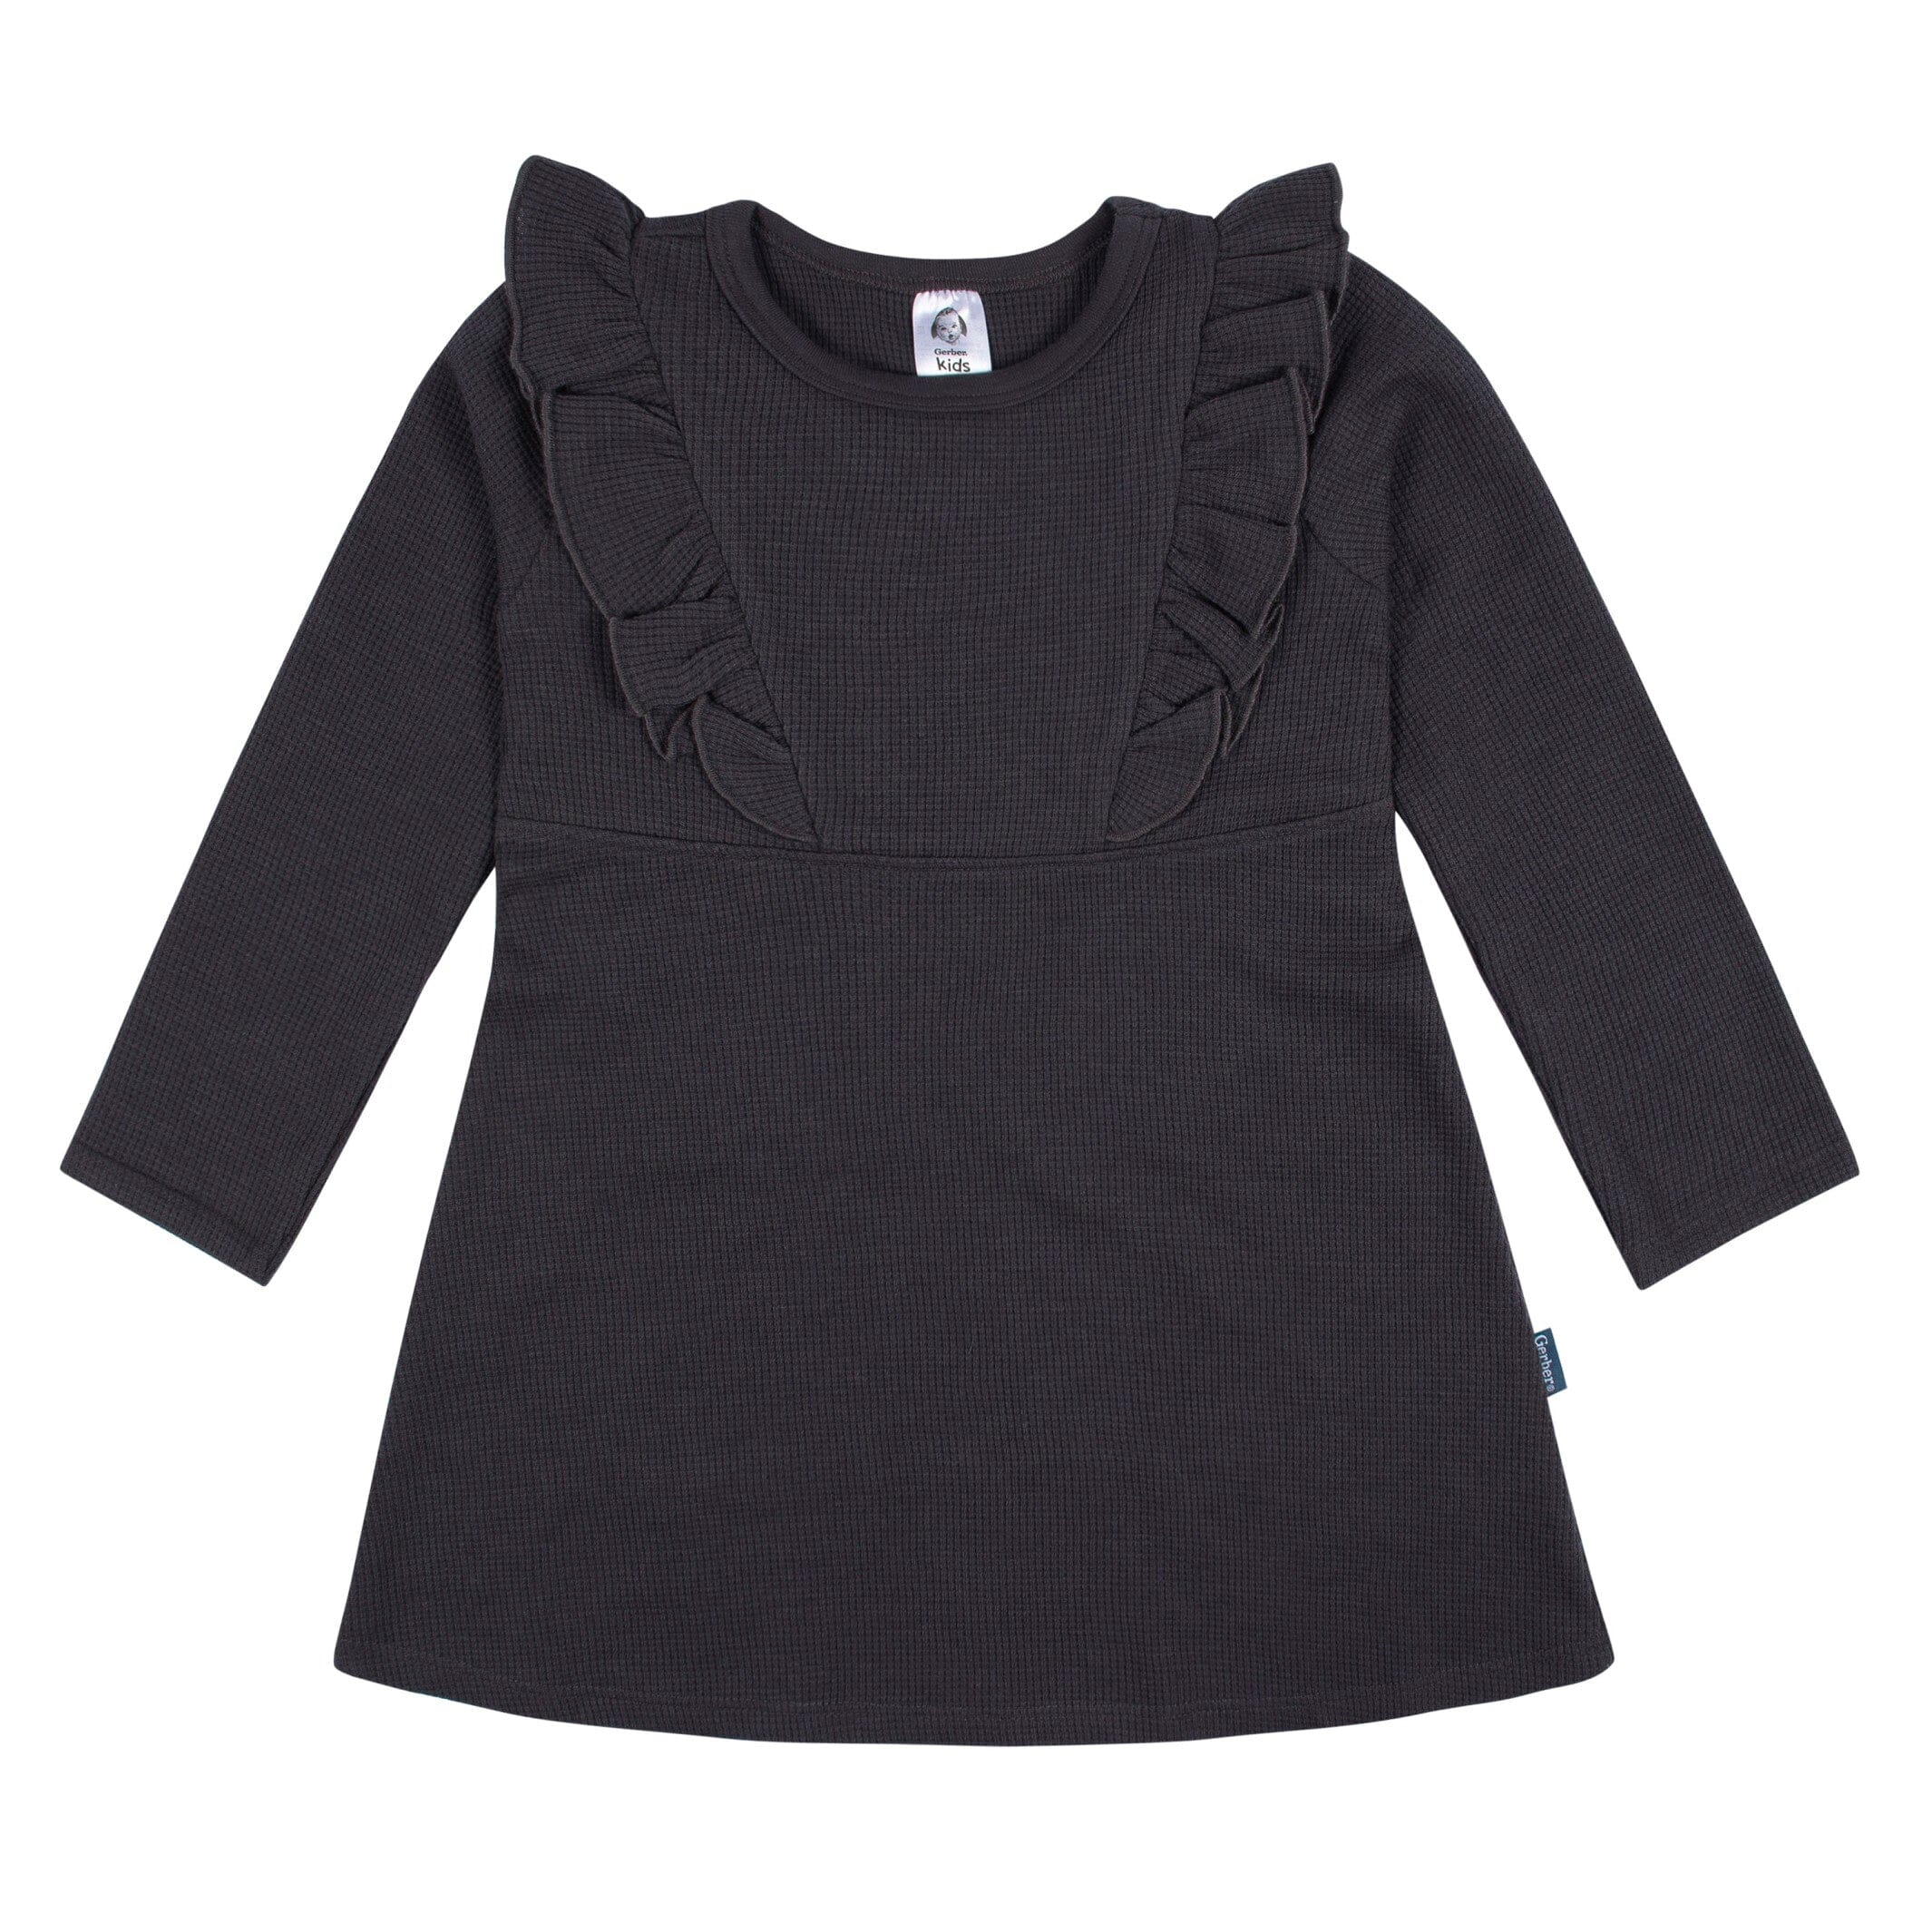 Infant and Toddler Girls Charcoal Dress with Ruffle – Gerber Childrenswear